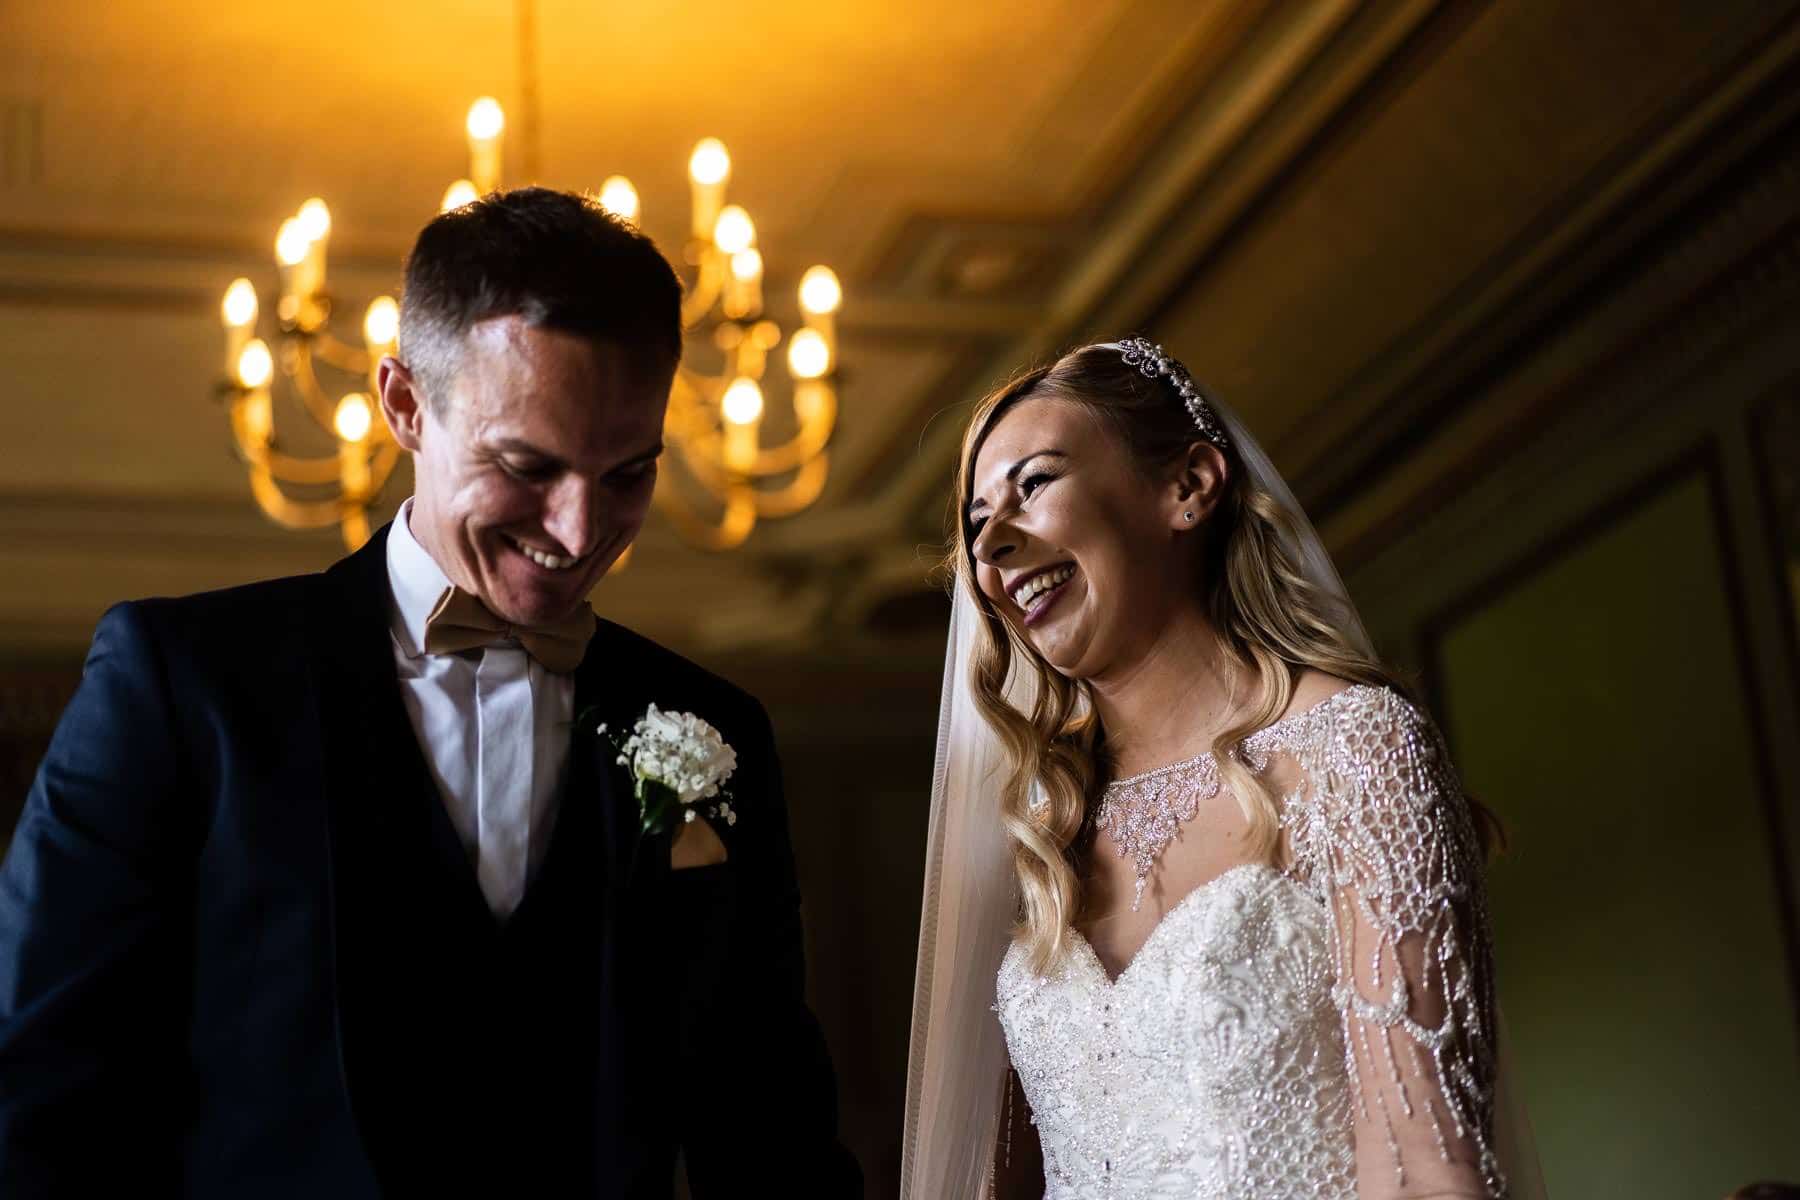 Bride and Groom laughing after just getting married